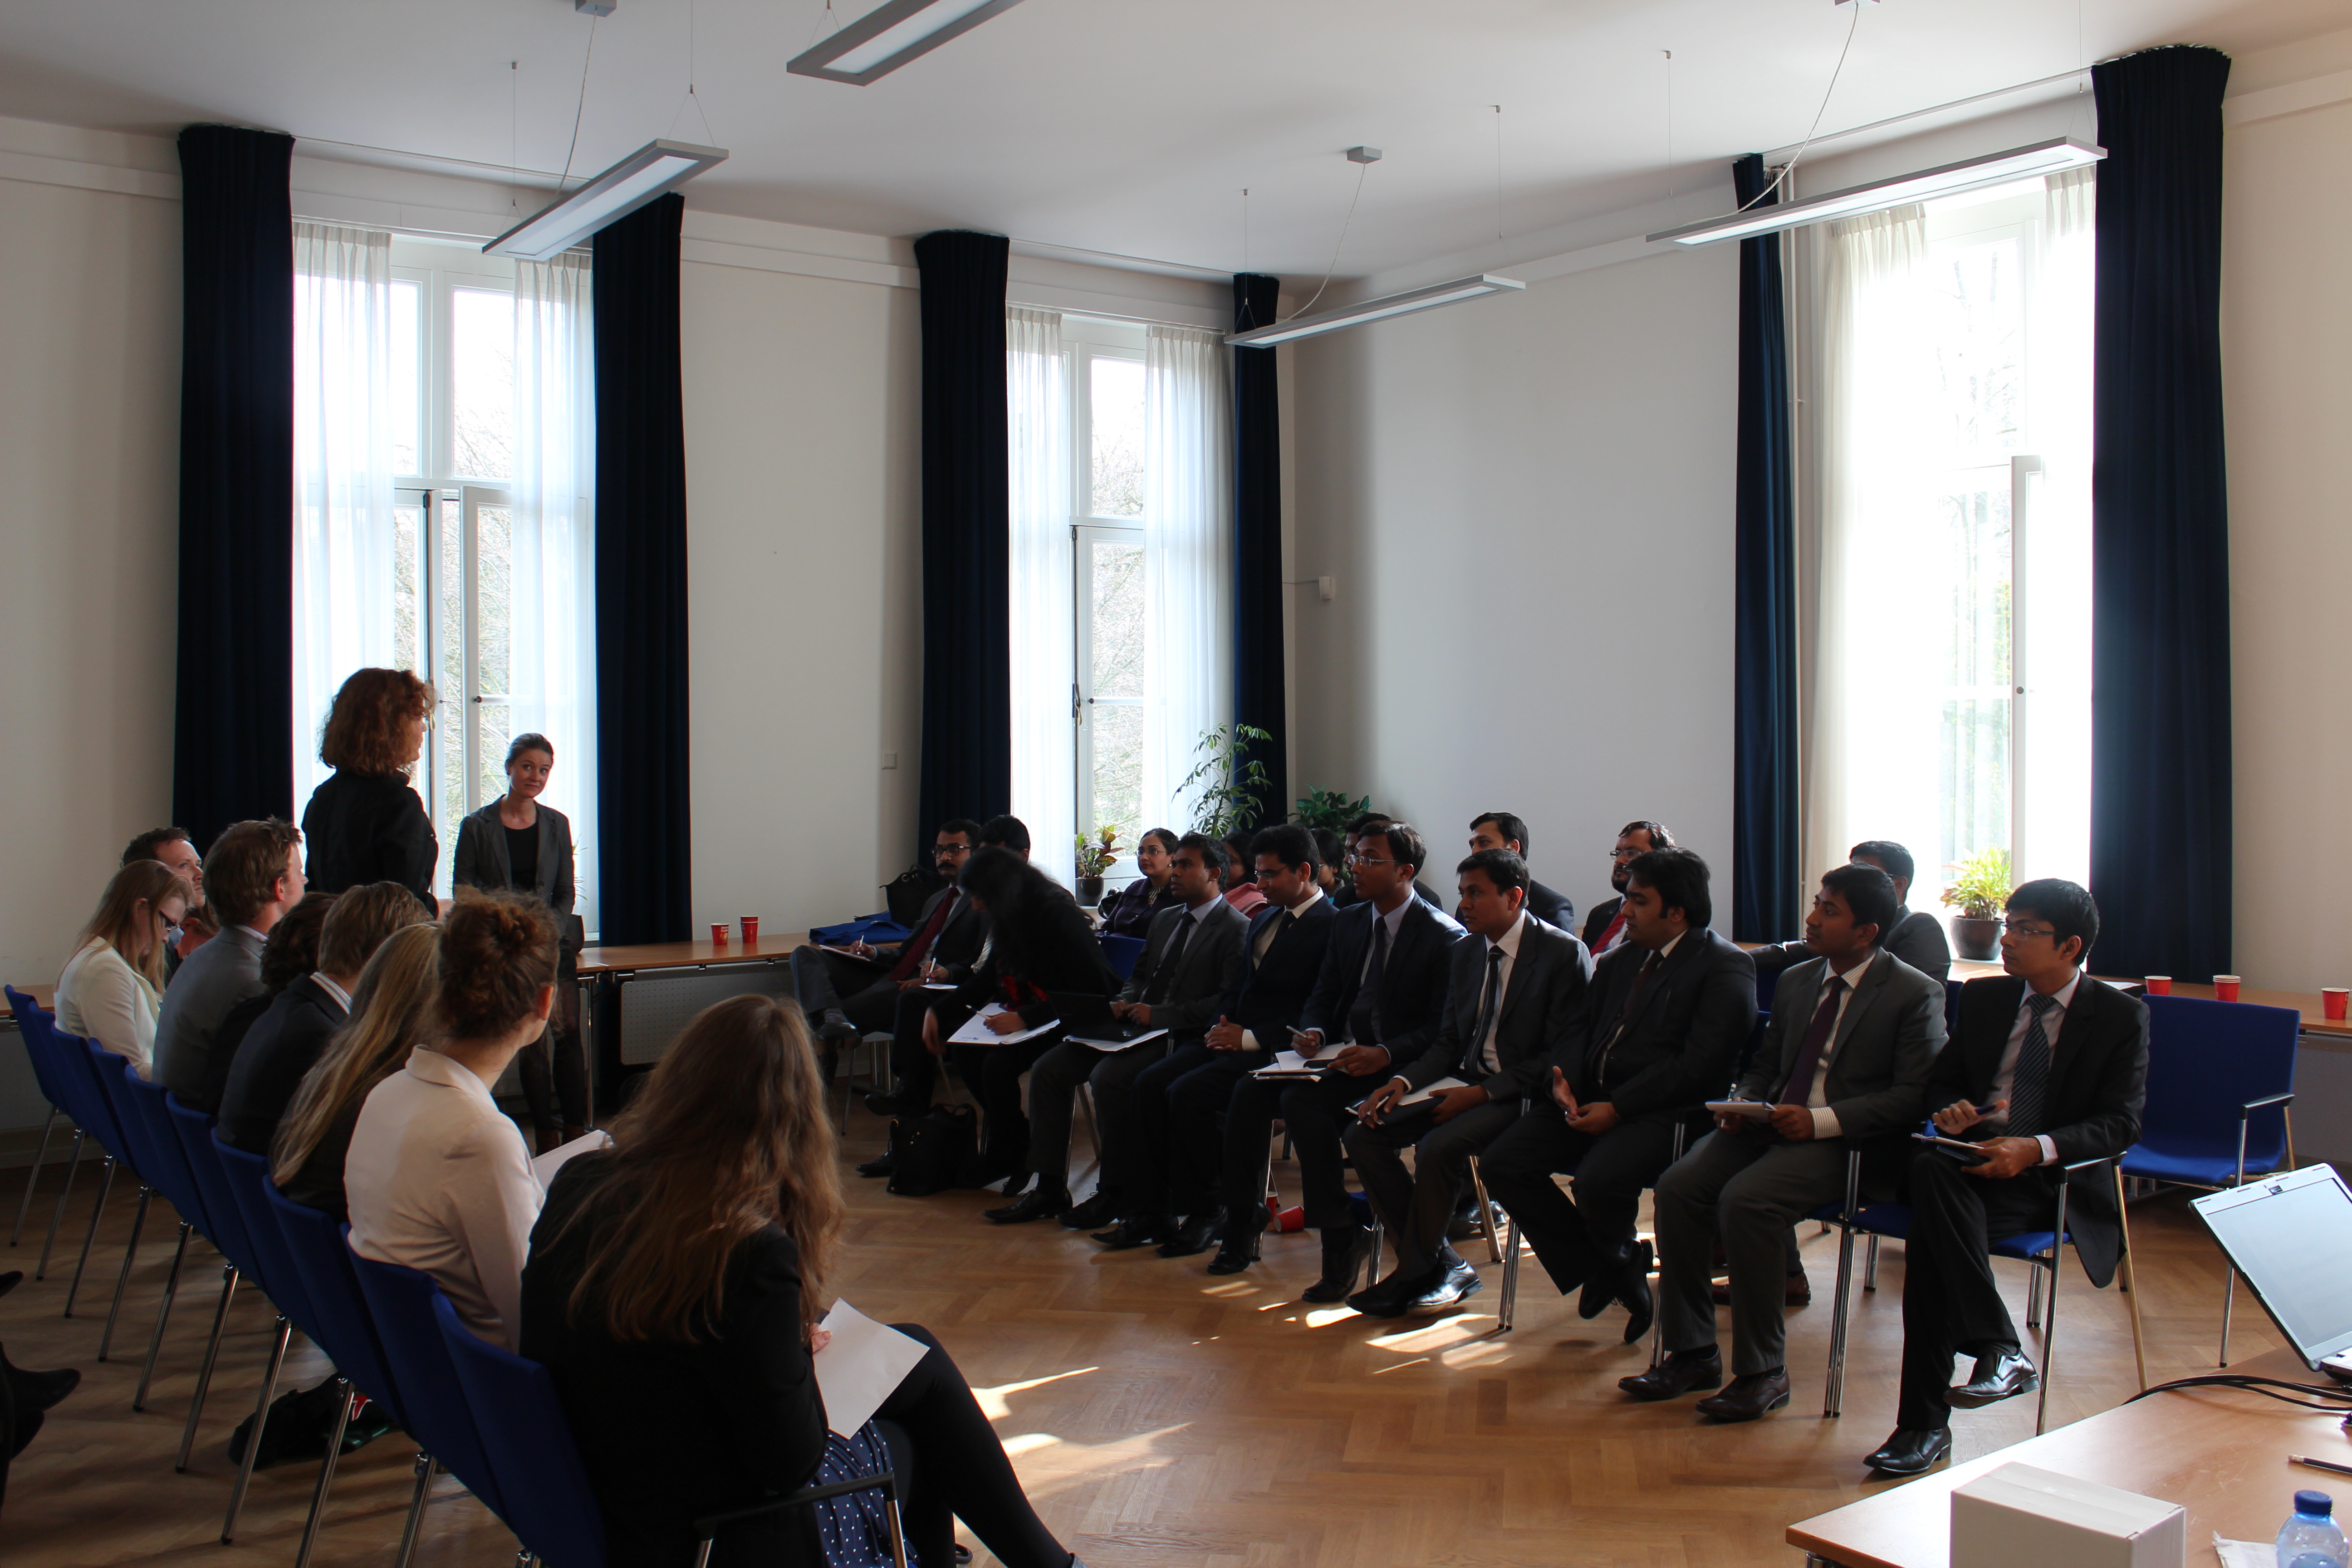 Debating session between diplomats from Bangladesh and Pakistan and interns from the Dutch MFA